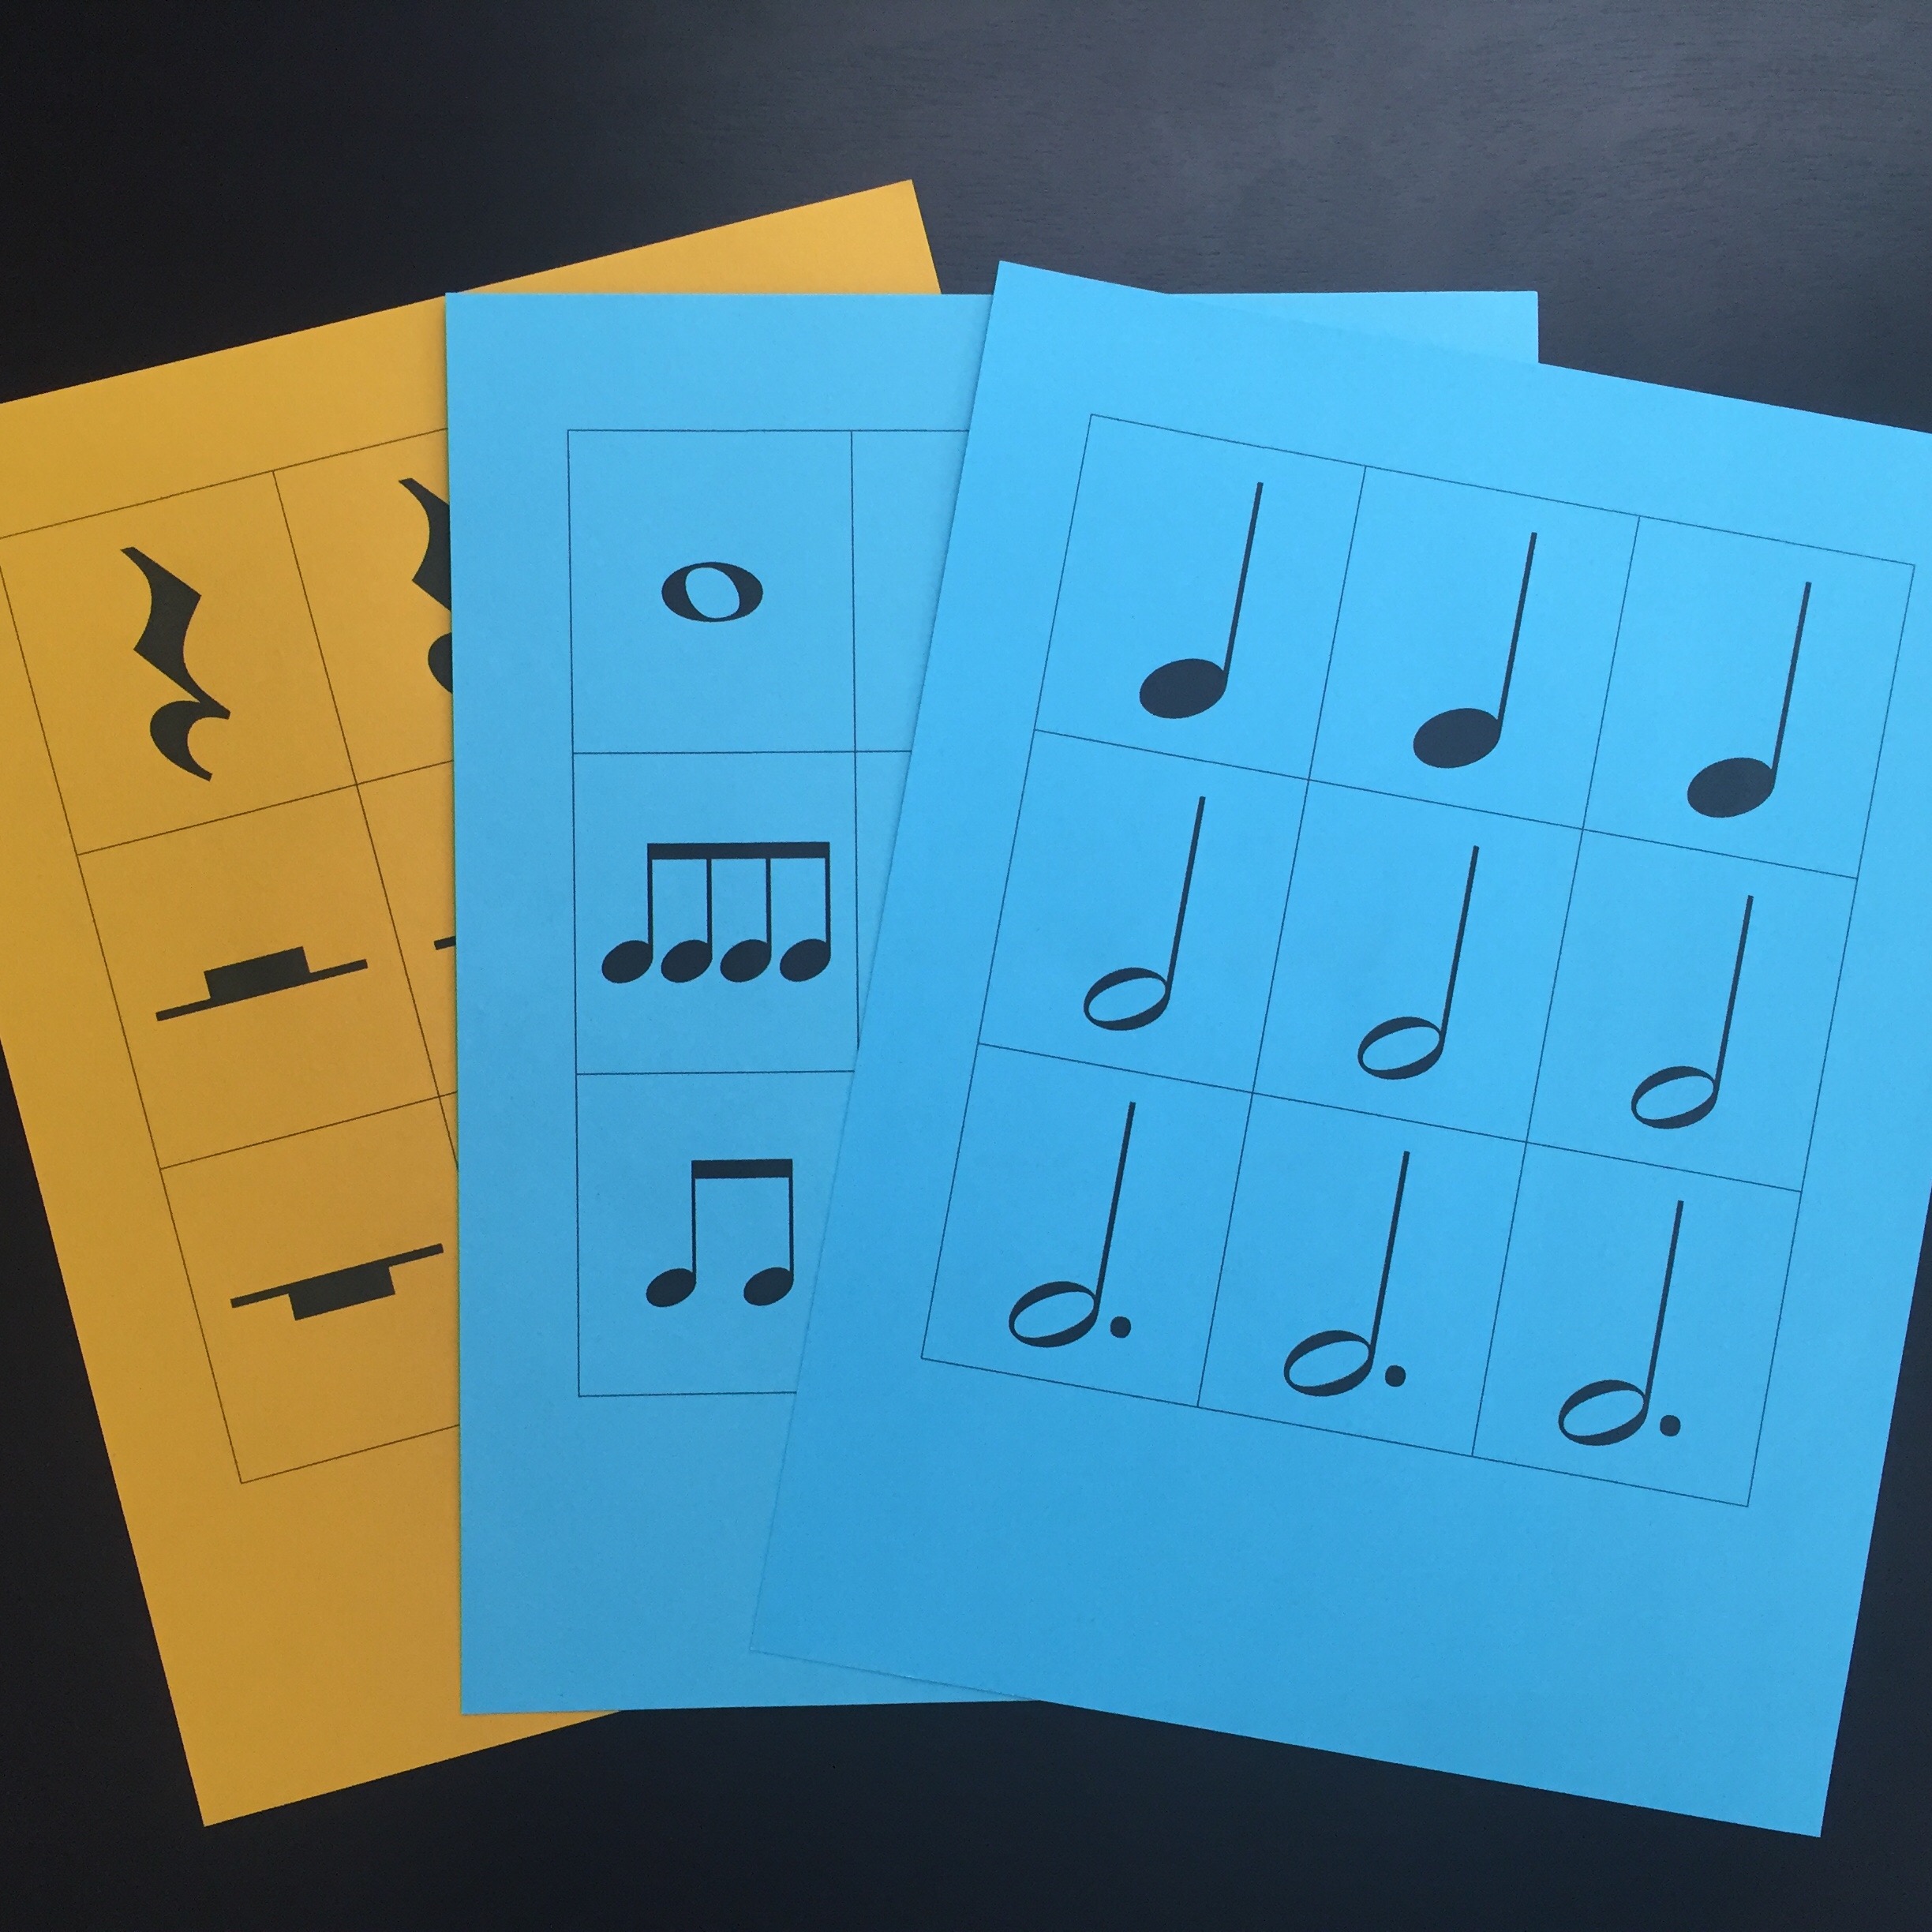 free-printable-rhythm-cards-piano-with-lauren